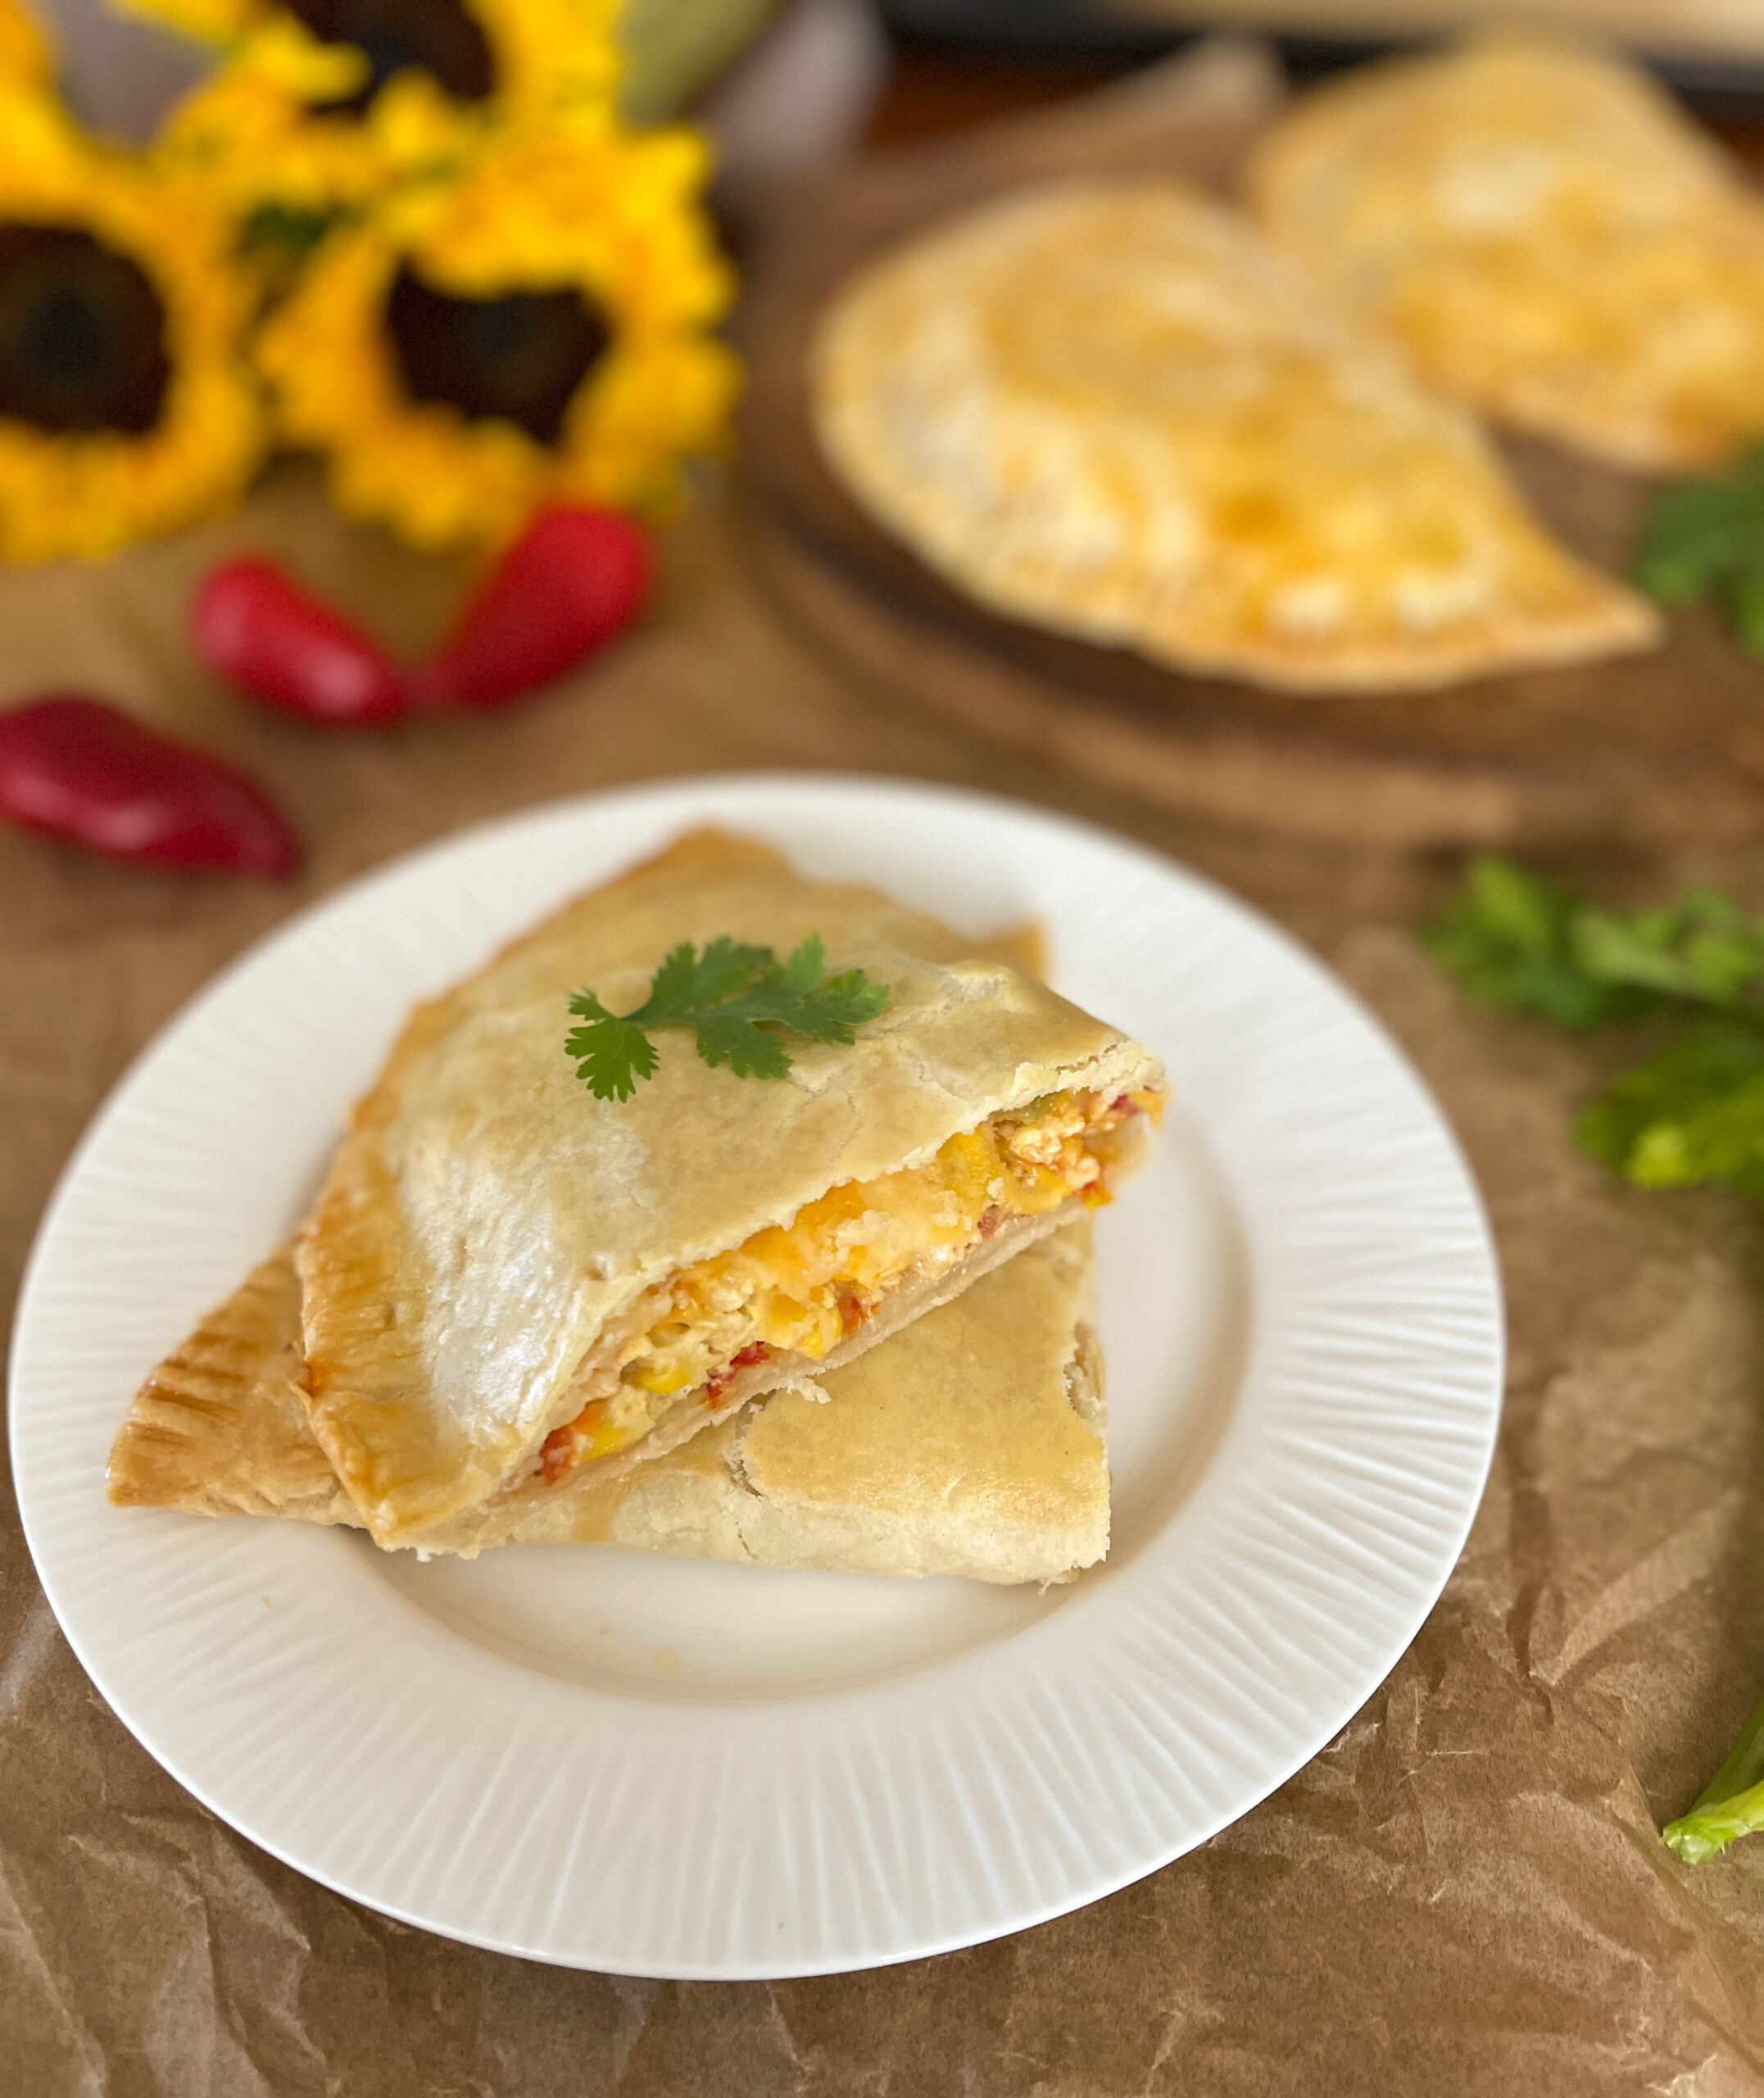 Tex-Mex Breakfast turnovers on a plate.